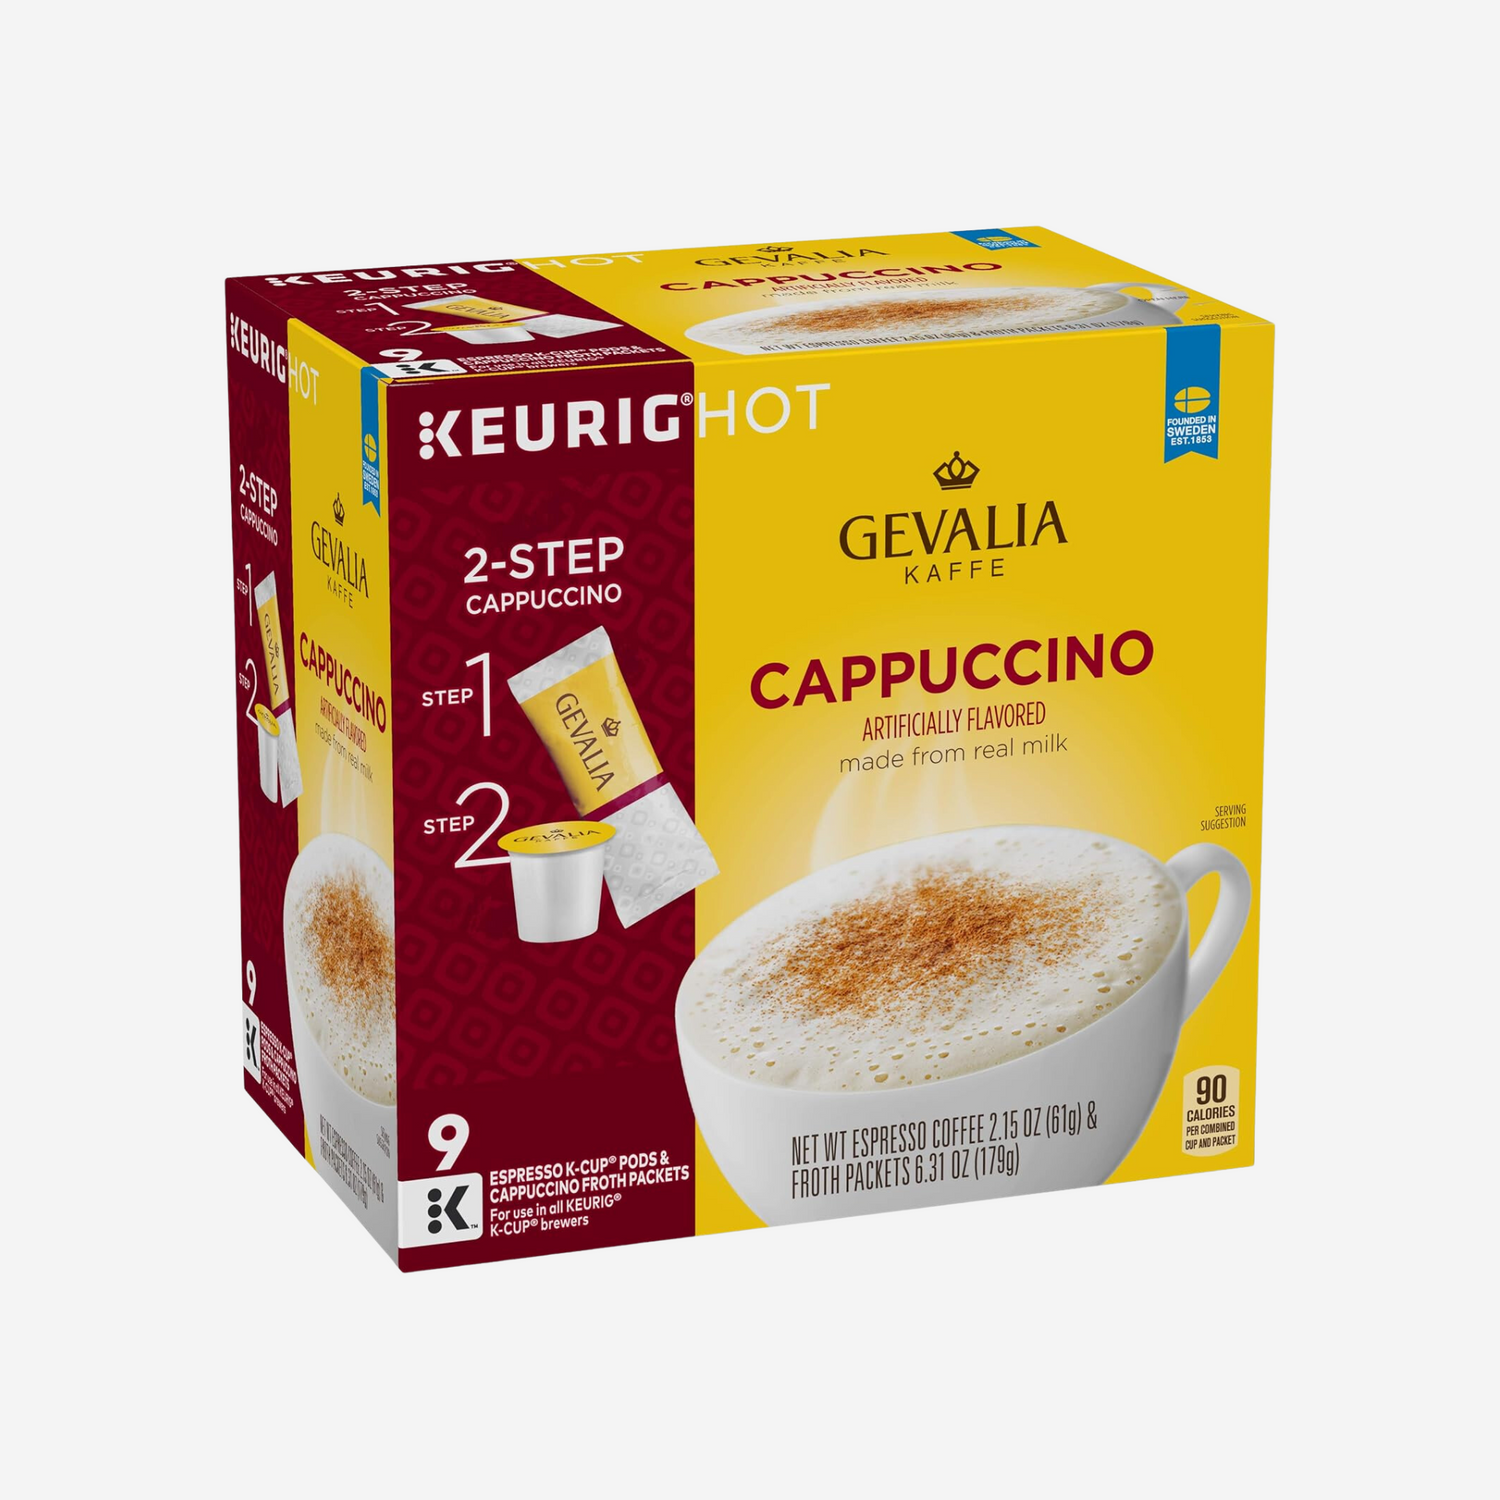 Gevalia Cappuccino Espresso K-Cup Coffee Pods & Froth Packets (36 Pods and Froth Packets), 9 Count (Pack of 4)